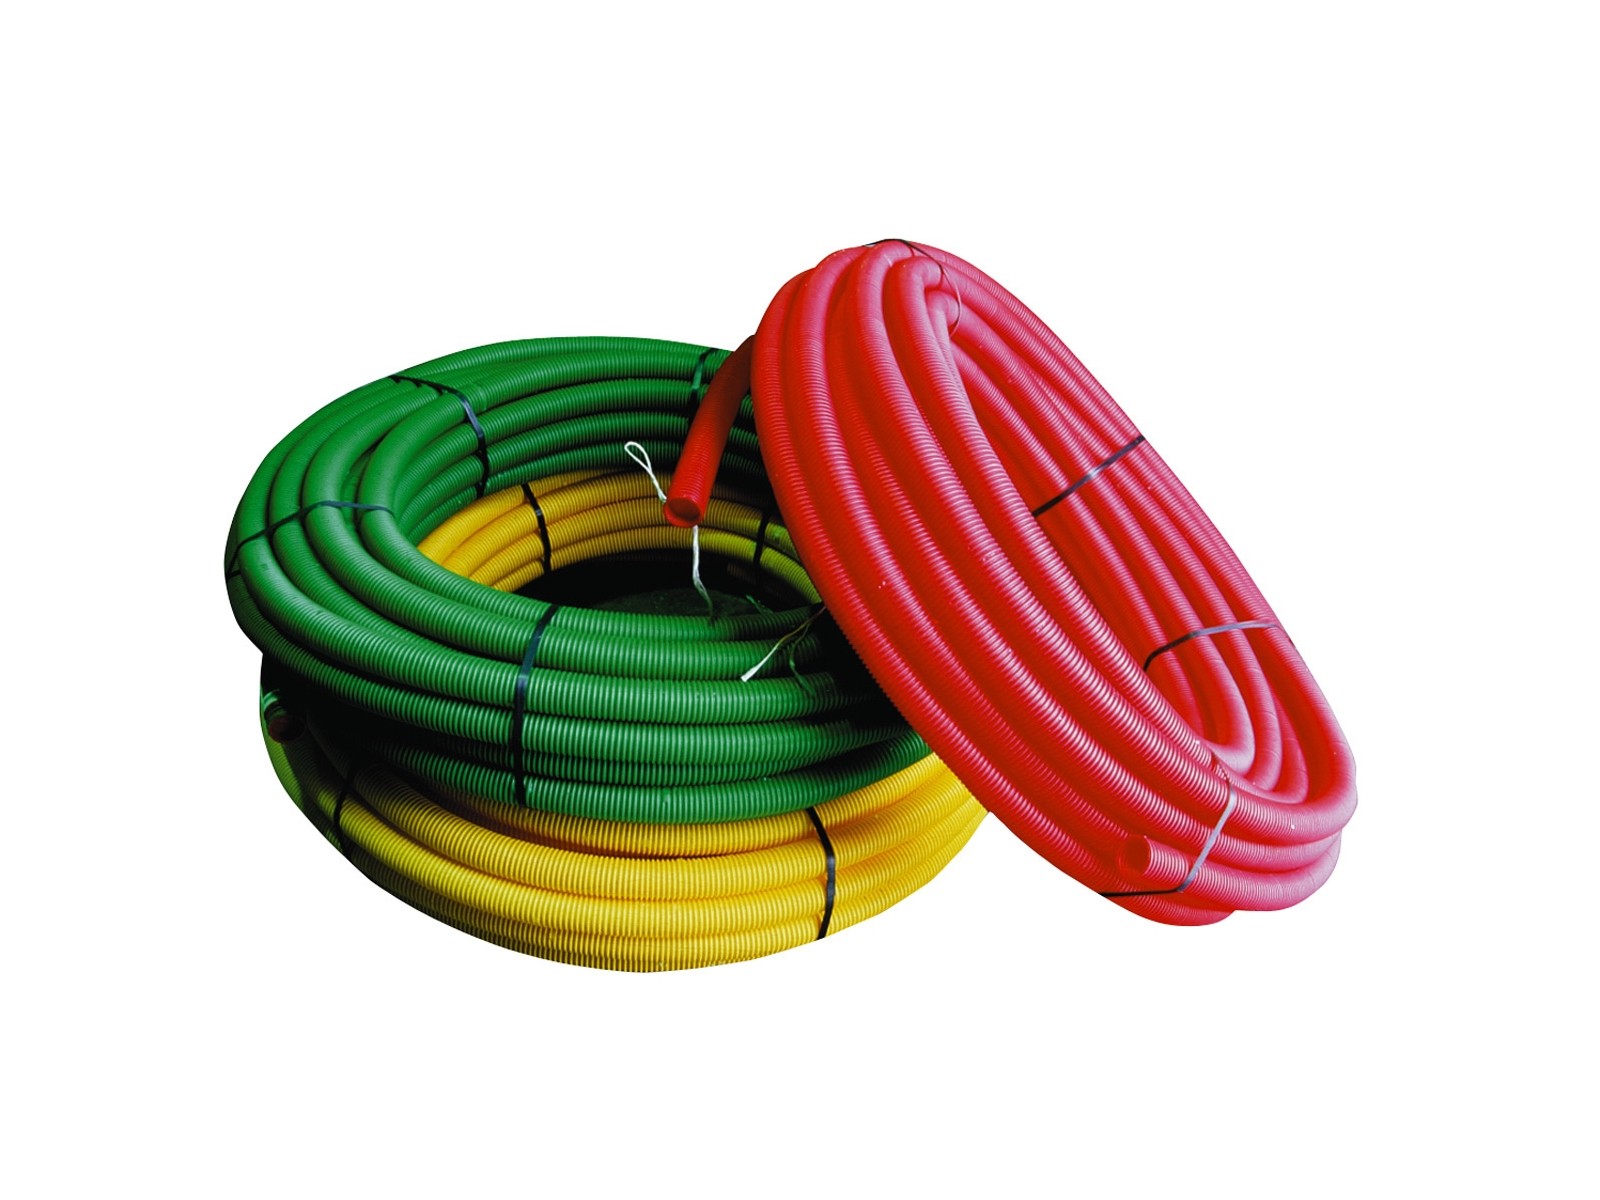 Corrugated plastic tubing cable protection